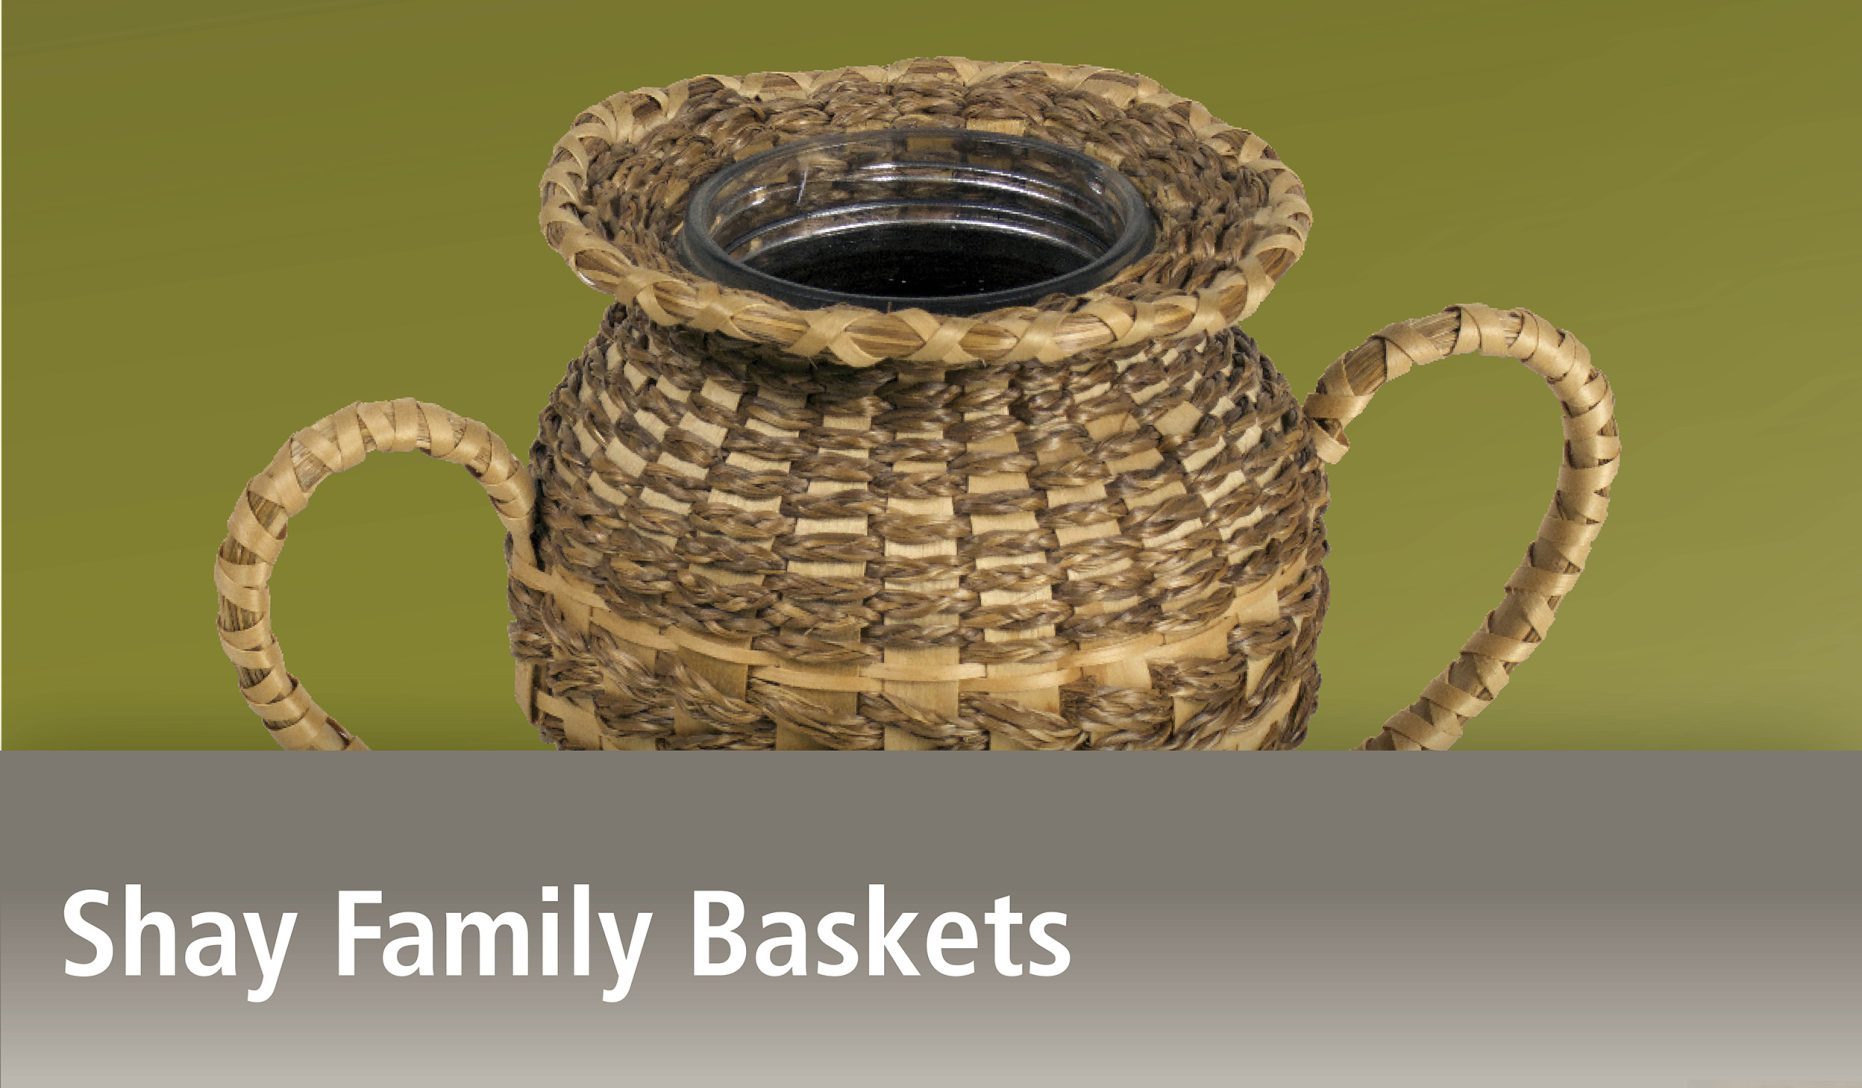 Image of basket in the shape of a trophy with two handles woven around a glass jar using braided sweetgrass above the title Shay Family Baskets.